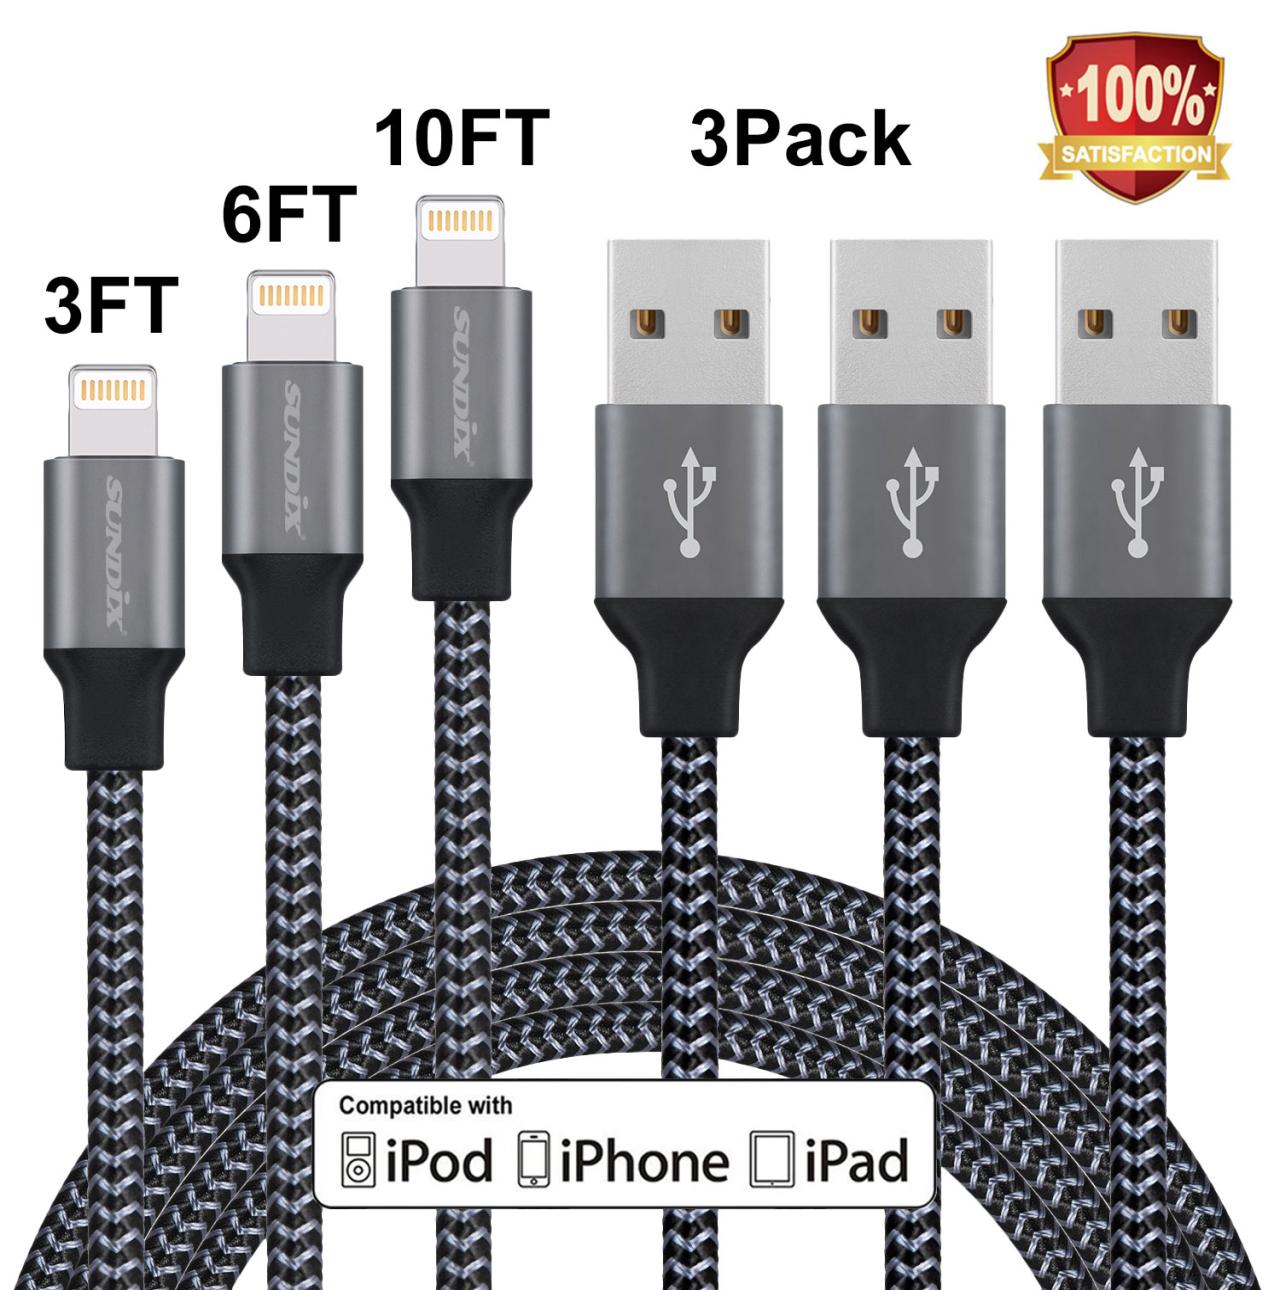 IDiSON 4Pack iPhone Lightning Cable Apple MFi Certified Braided Nylon Fast Charger Cable Compatible iPhone Max XS XR 8 Plus 7 Plus 6s 5s 5c Air iPad Mini iPod Silver White 3ft 6ft 6ft 10ft 